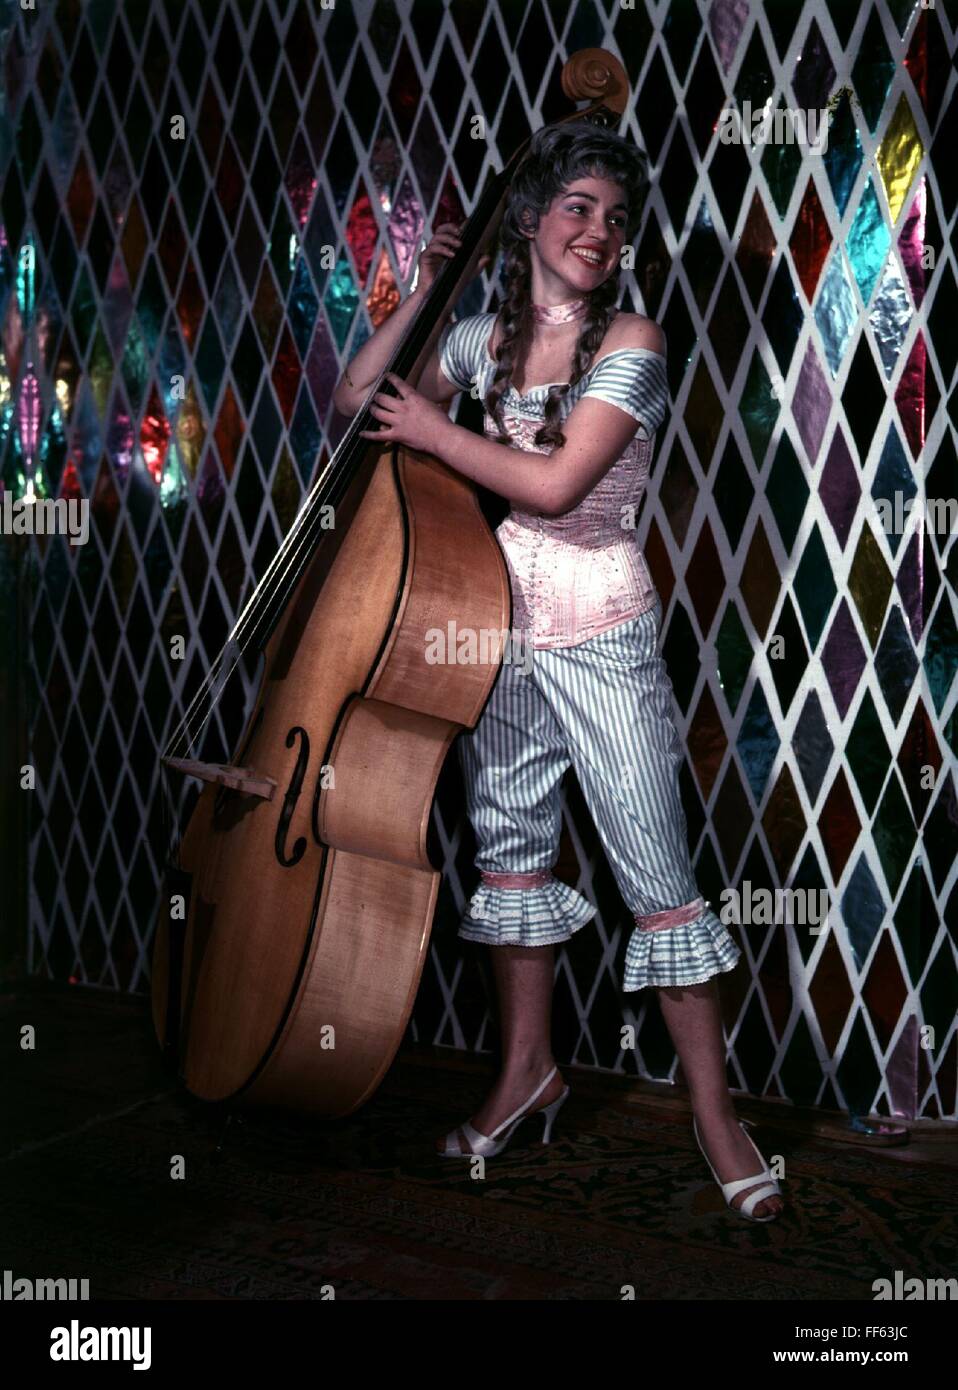 carnival,  young woman in costume with corsage and wig, holding double bass, Additional-Rights-Clearences-Not Available Stock Photo